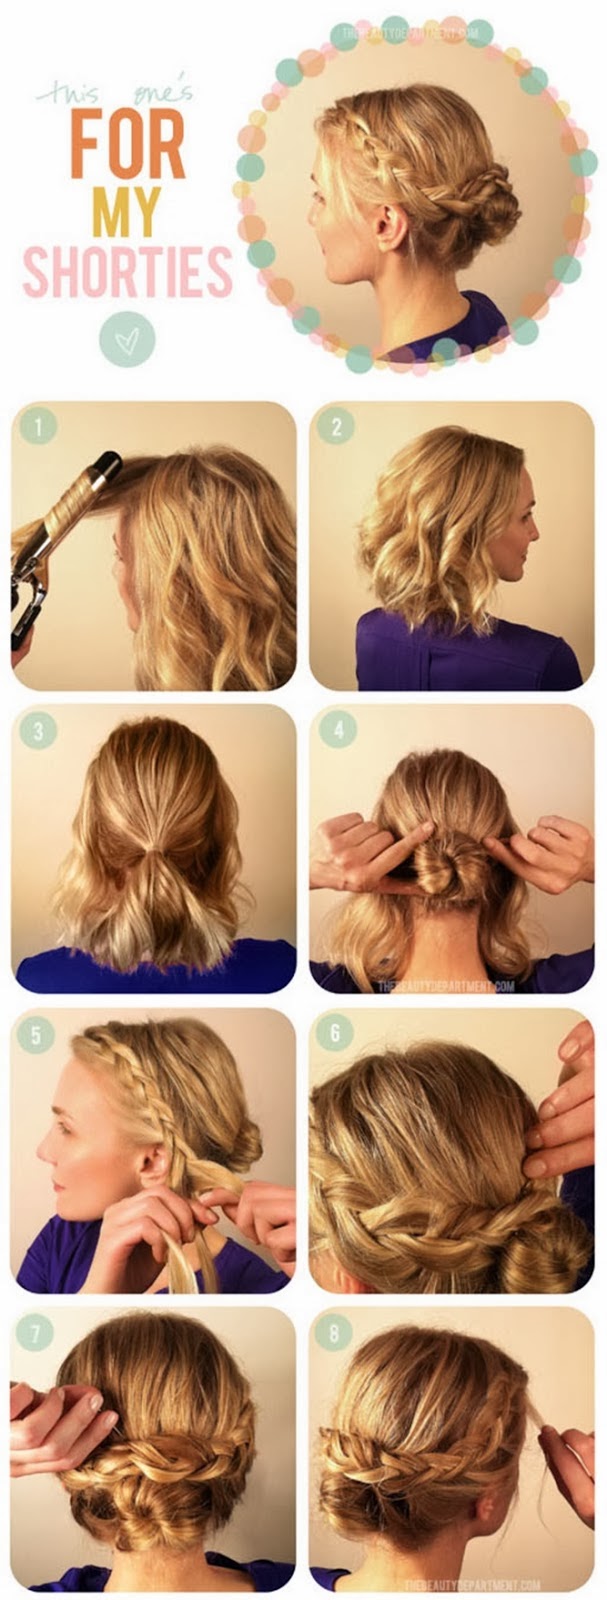 Braided Hairstyle Tutorial for Women